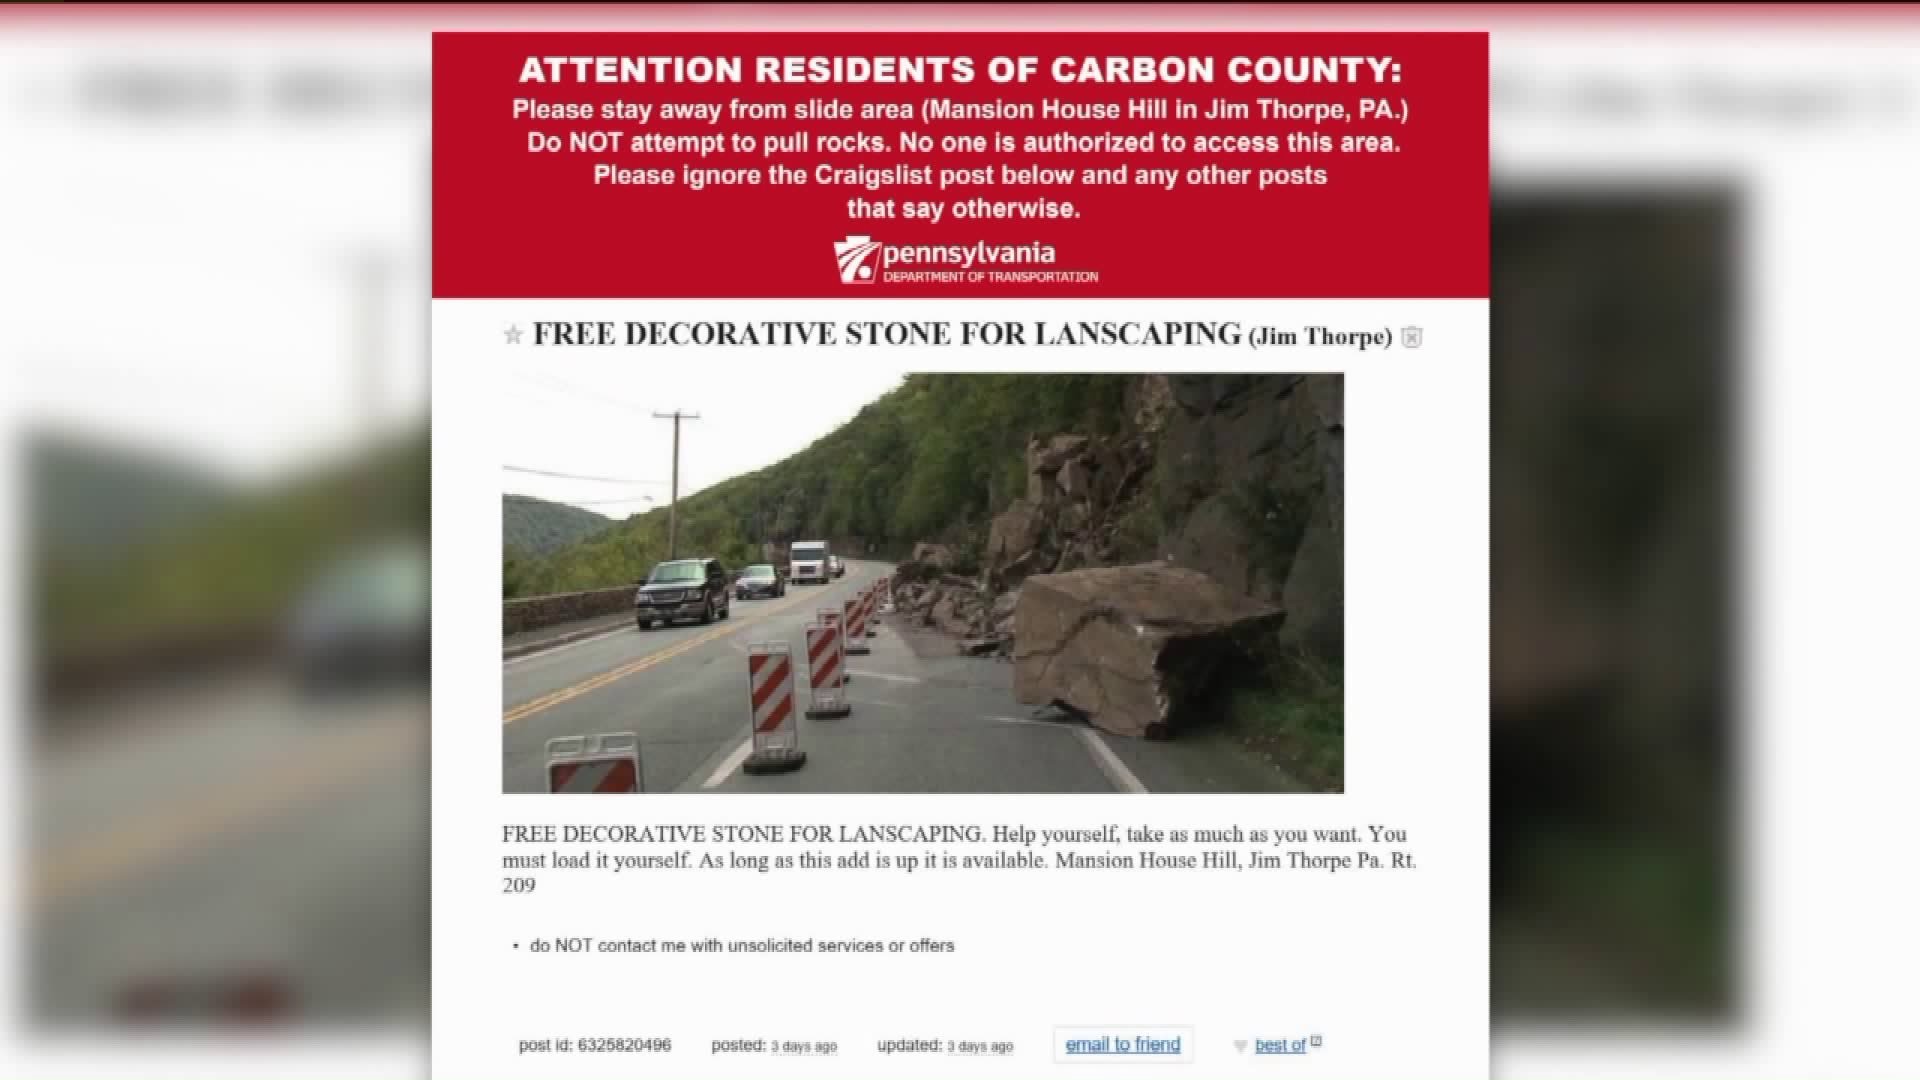 PennDOT Officials: Ignore Craigslist Ad for Rock Slide Rocks in Carbon County